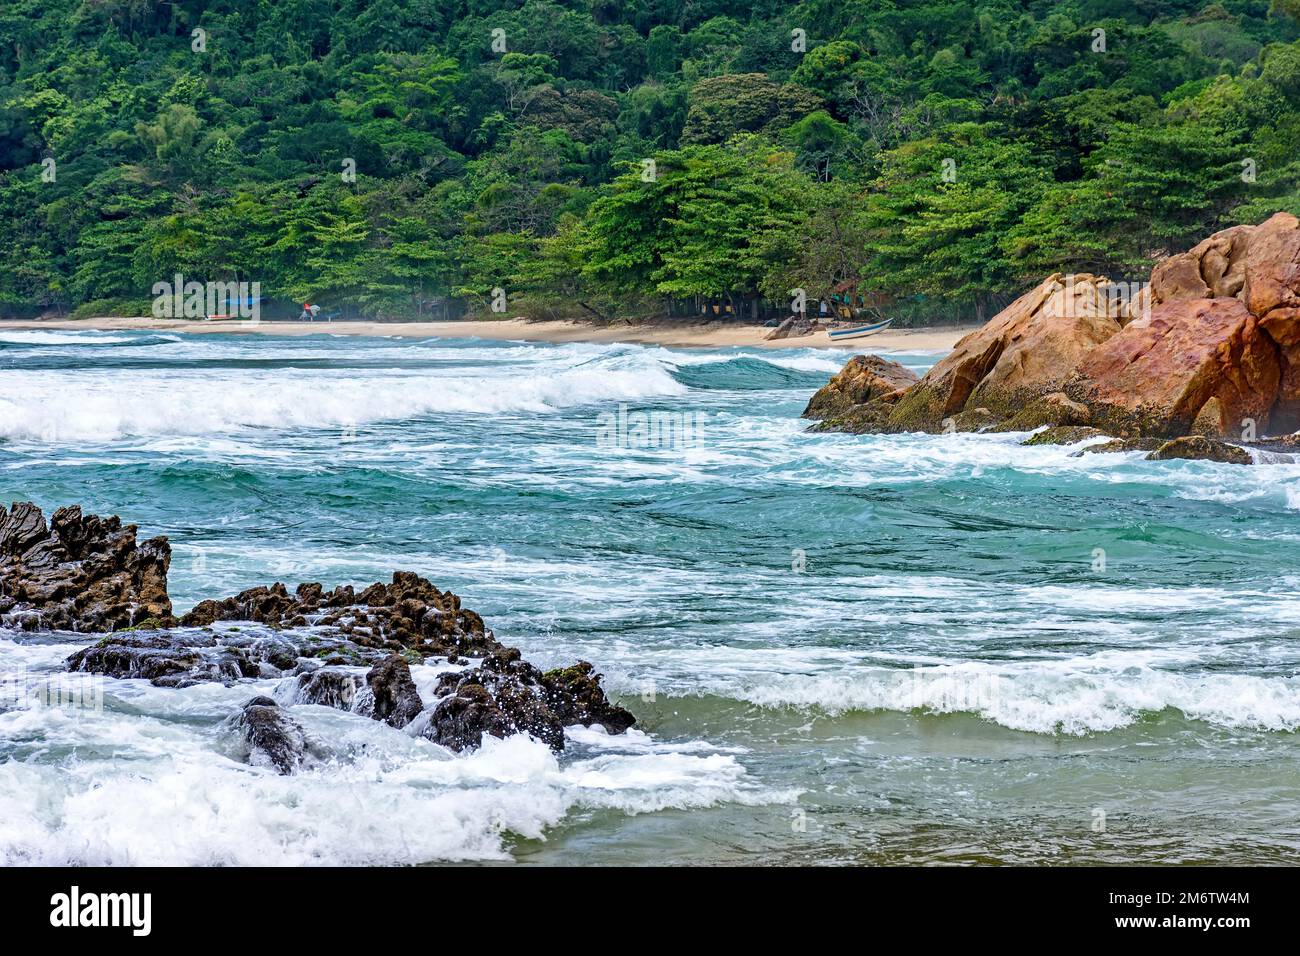 Stunning beach surrounded by rainforest in Trindade Stock Photo